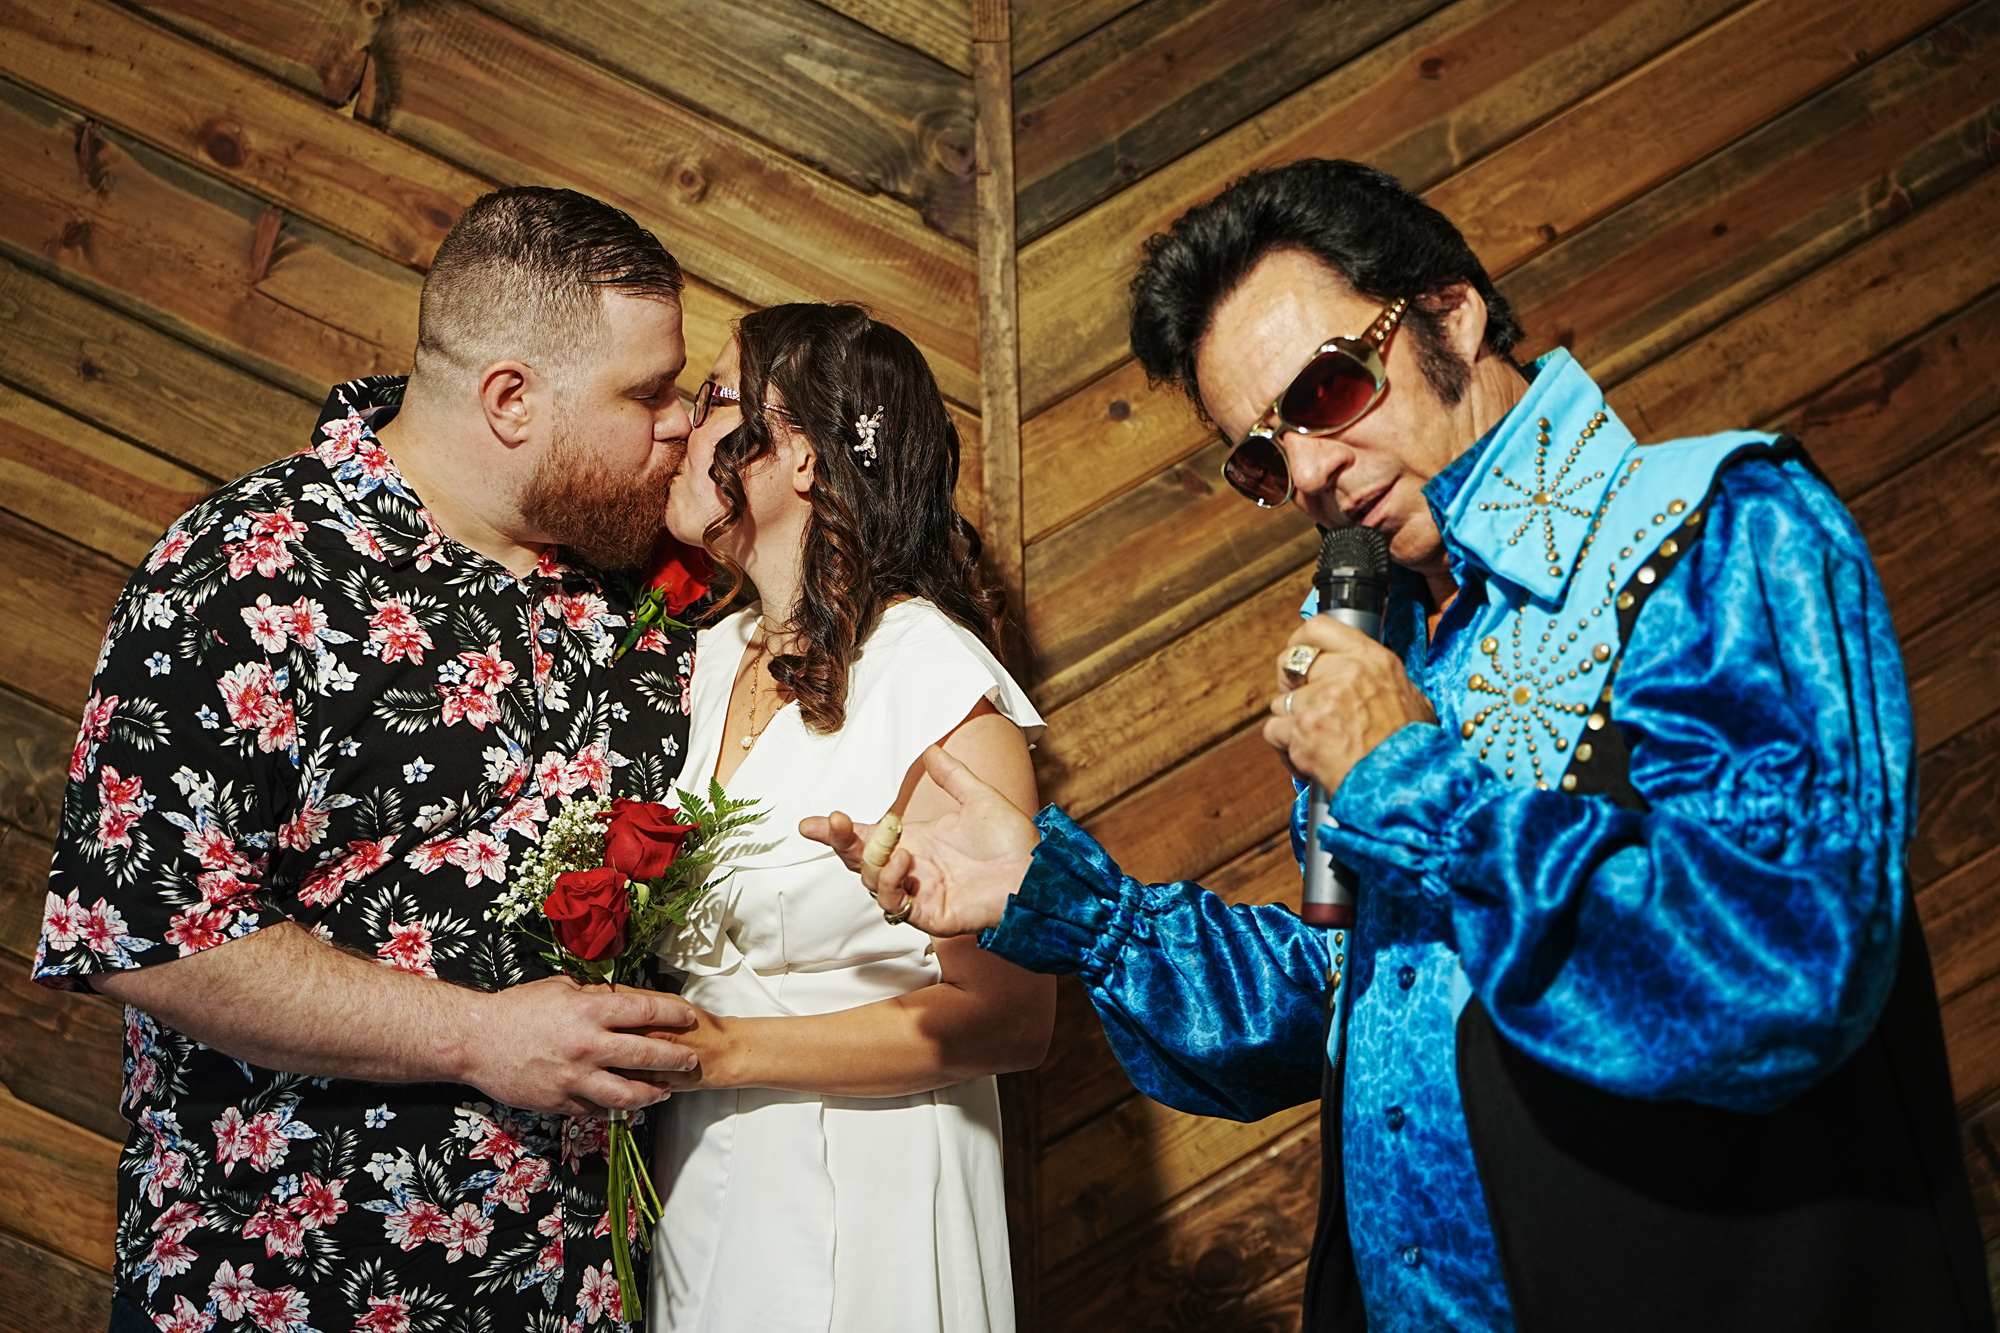 Elvis Presley impersonator with a couple kissing on camera